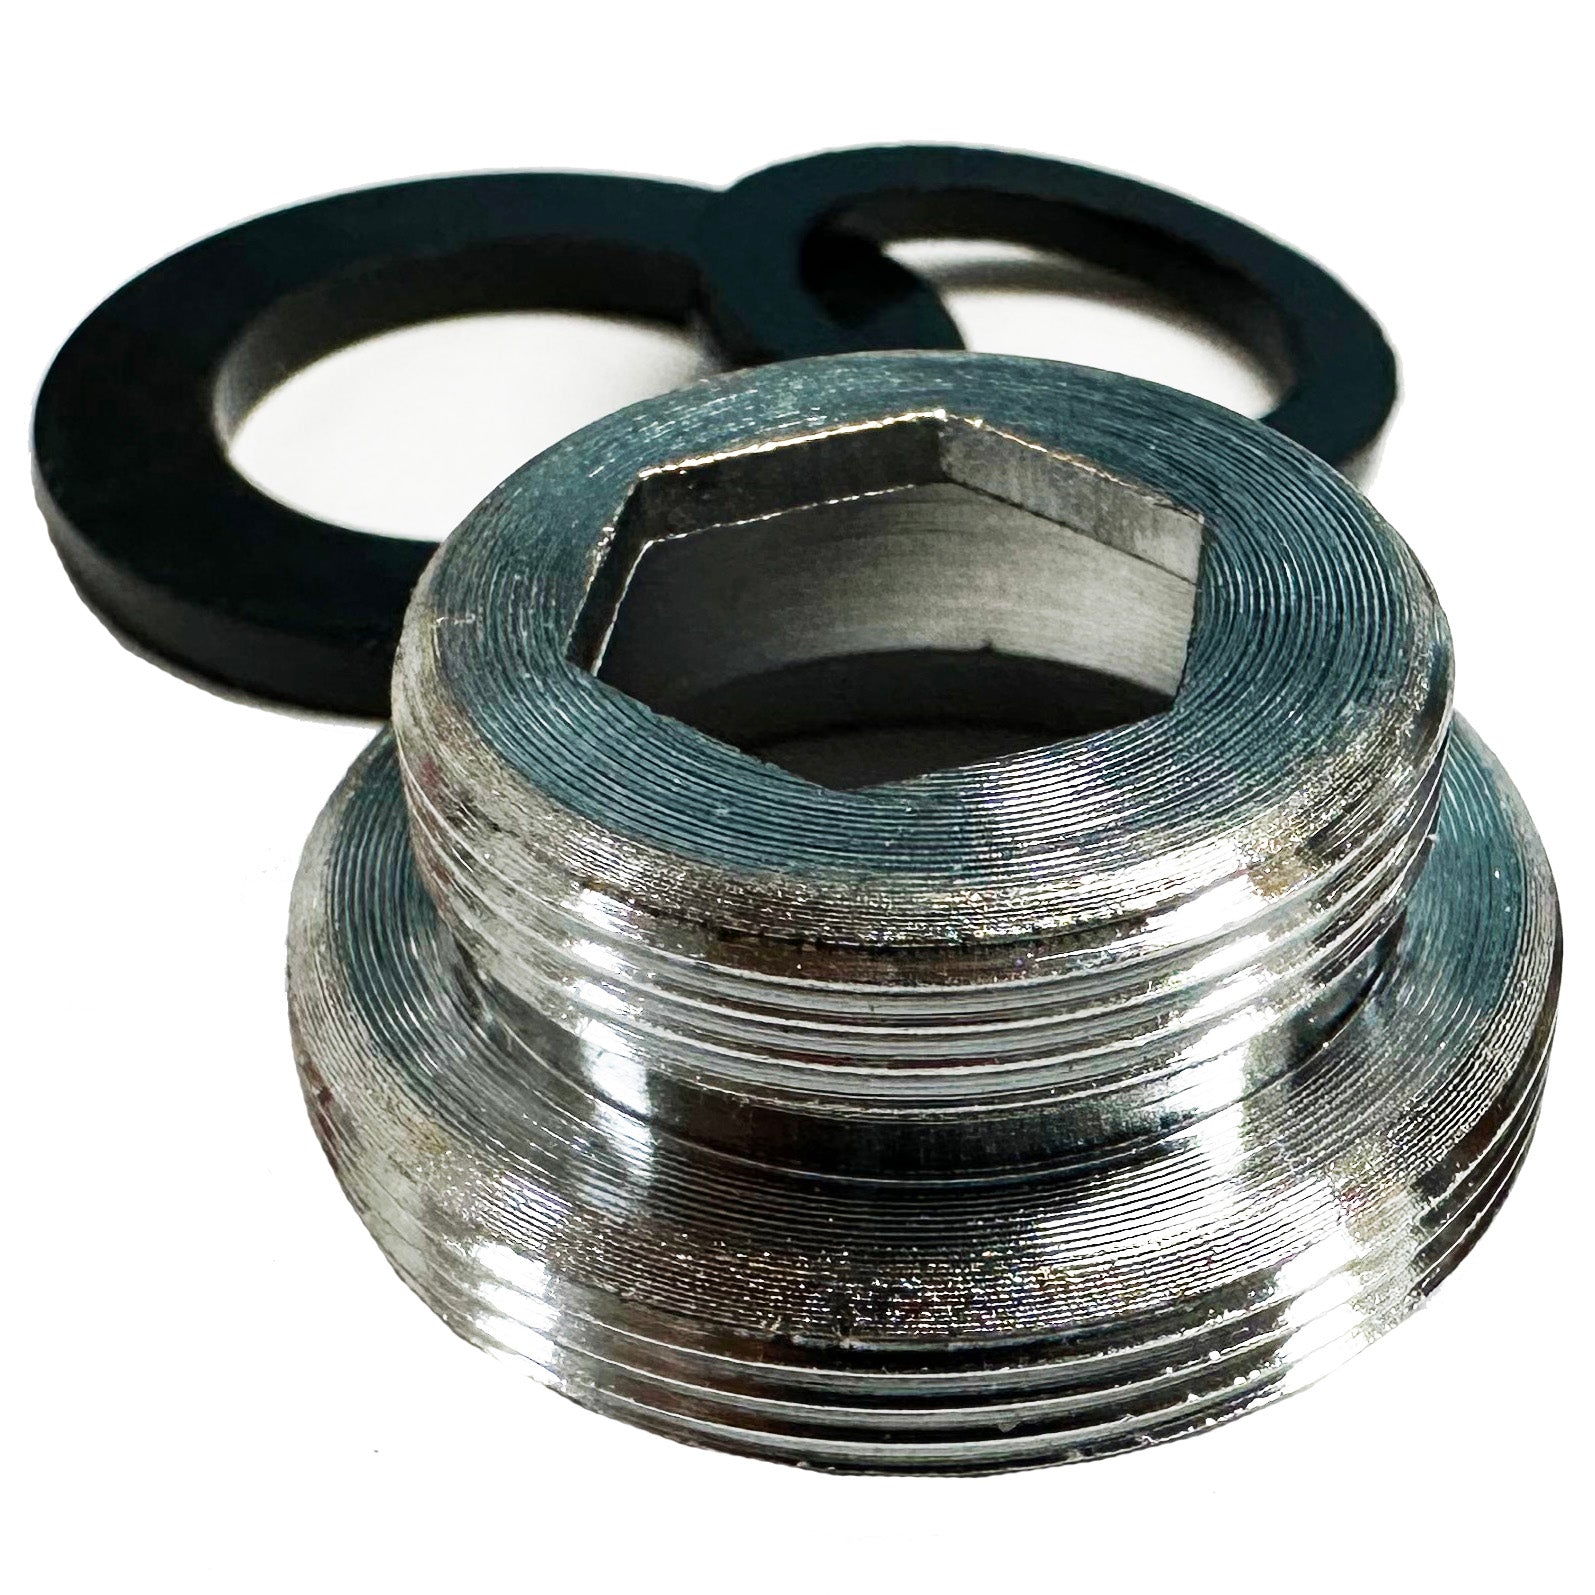 Adapter: 28mm male to 55/64